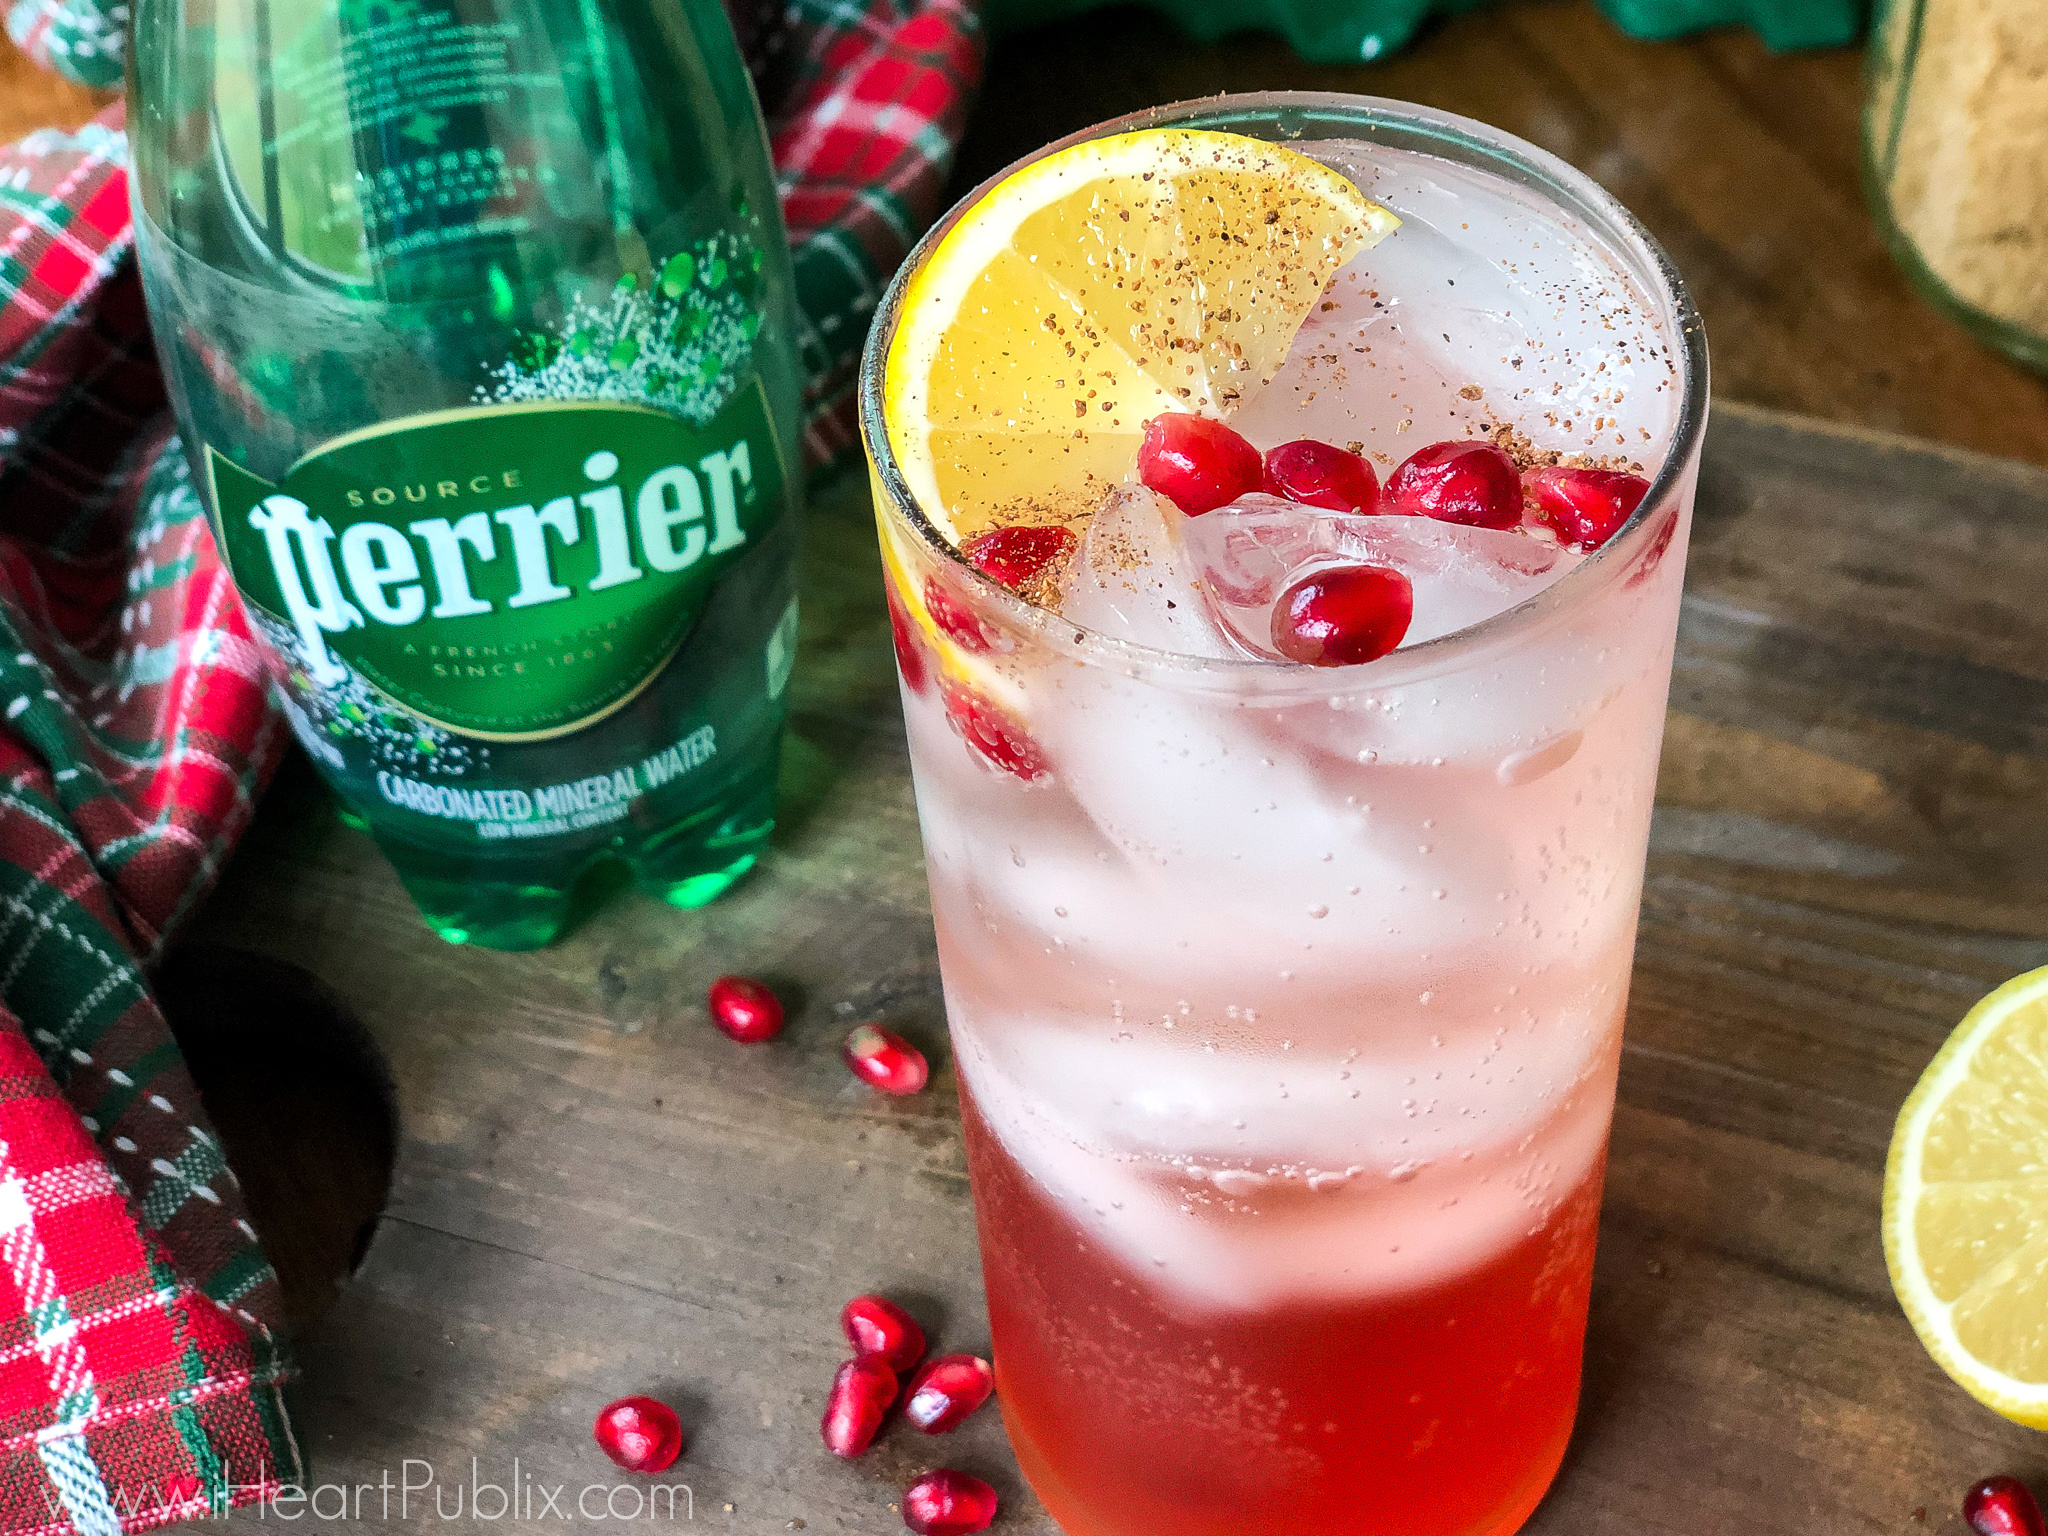 Try The Good Ole Time, A Tasty Cocktail Made With PERRIER® - Save Now At Publix on I Heart Publix